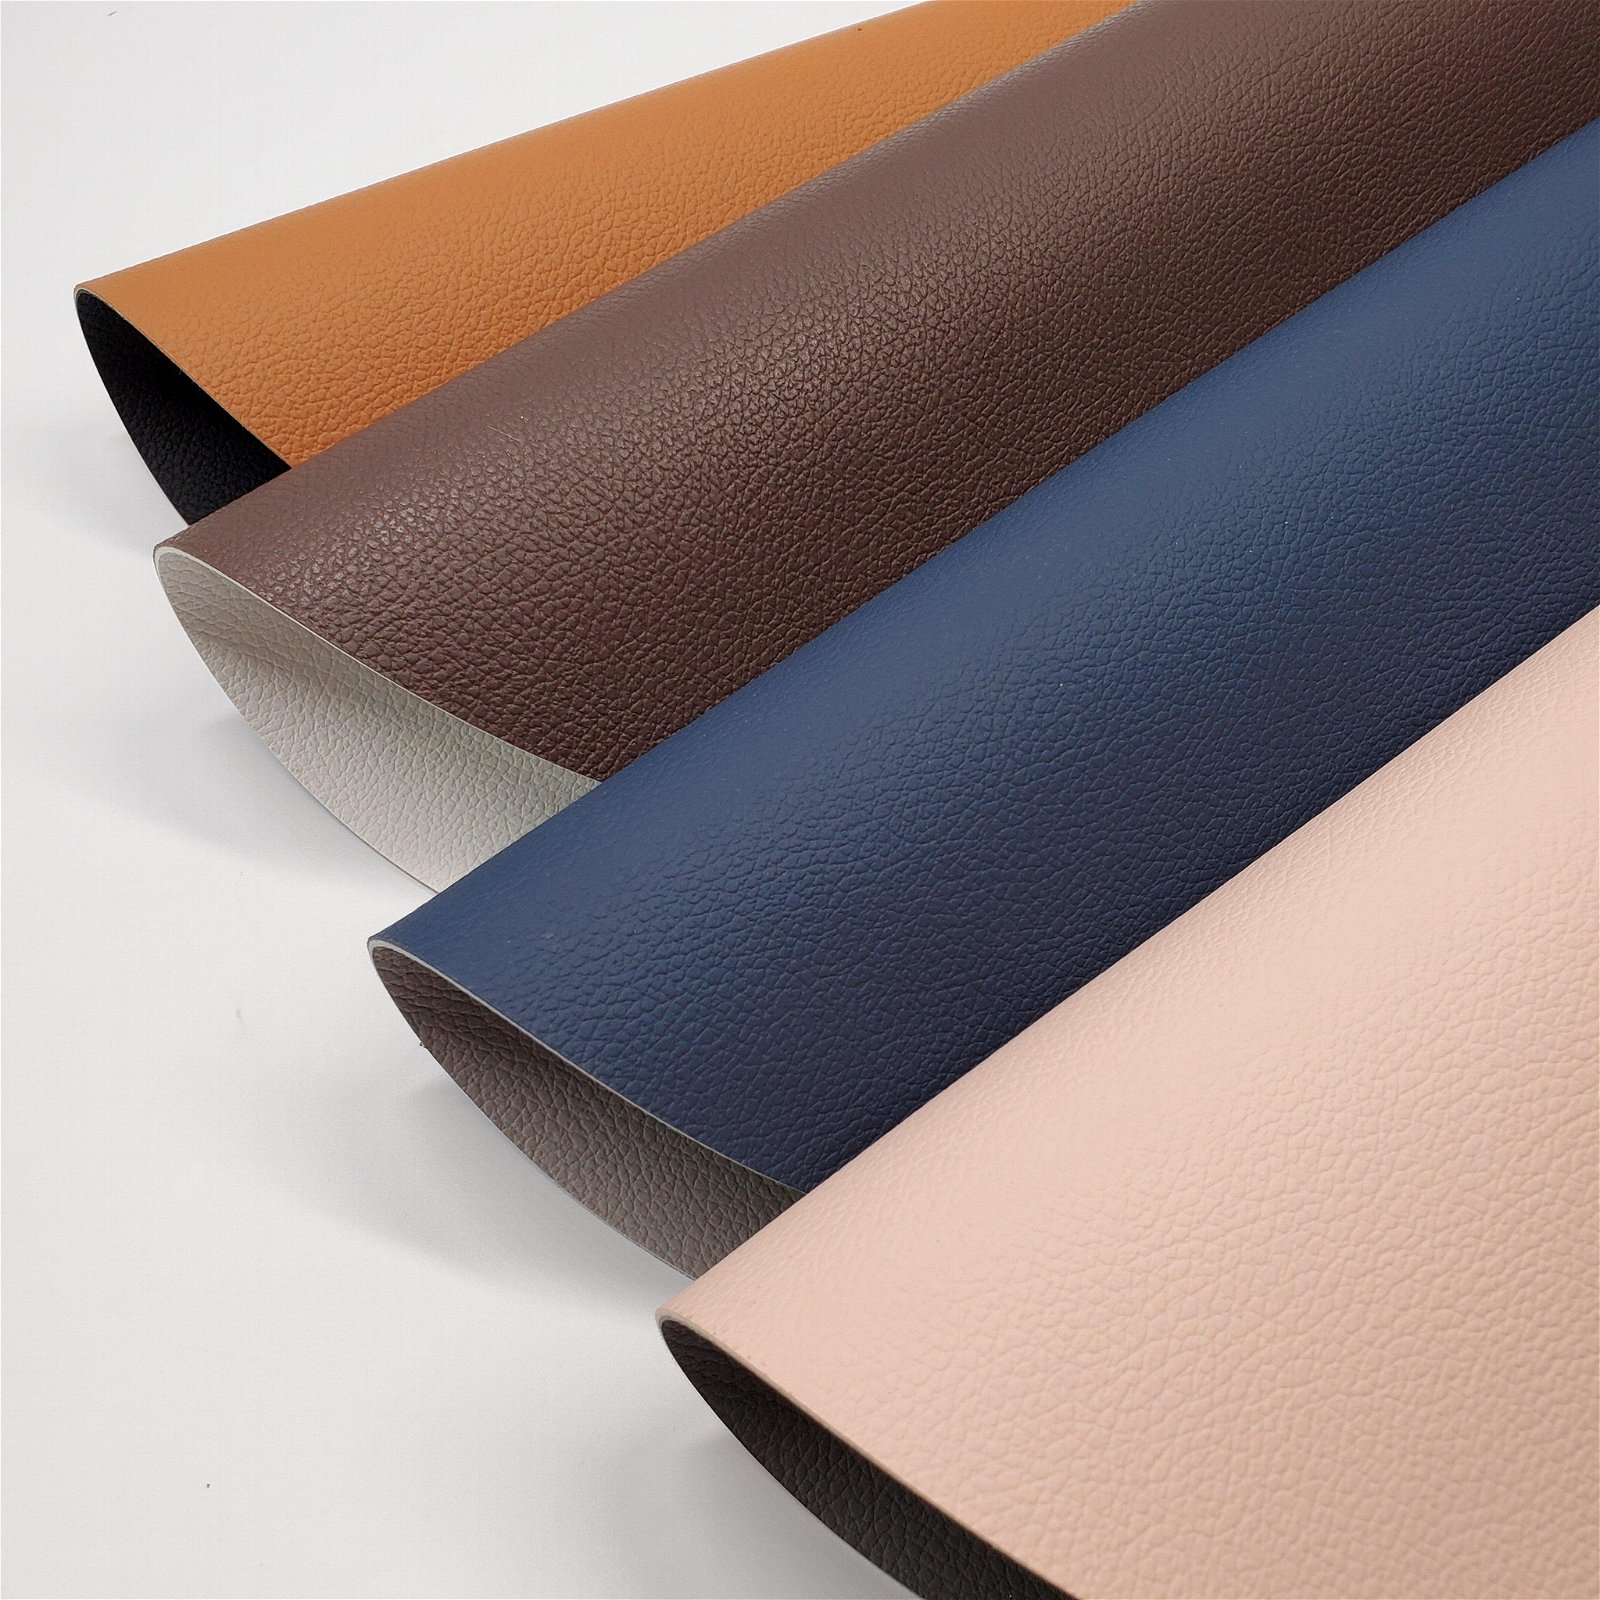 Tabletex doubt sides leather anti-slip PVC placemats western table mat 4